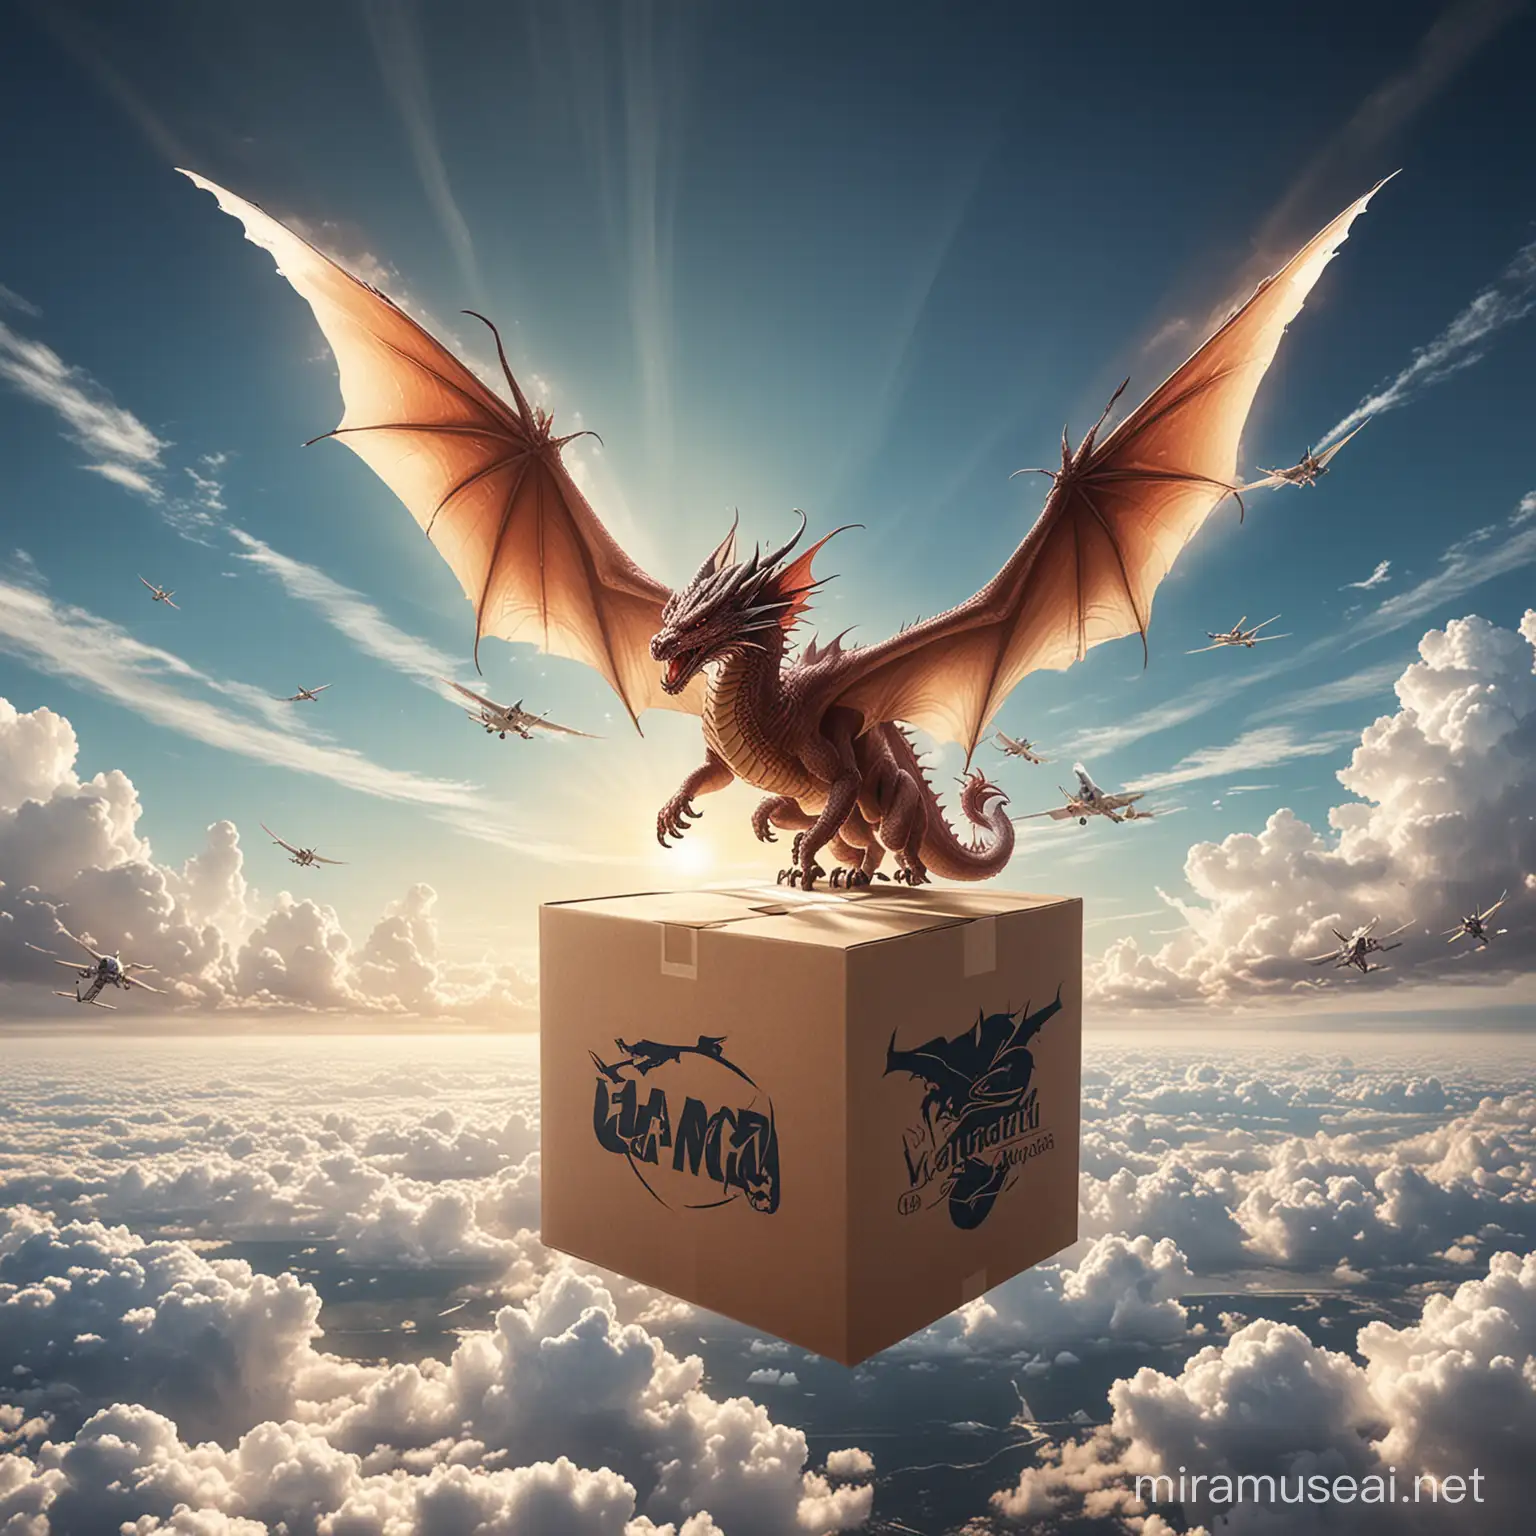 I work in an air logistics company, I need a poster with such a concept that there is a box in the sky and its wings are the wings of a dragon.